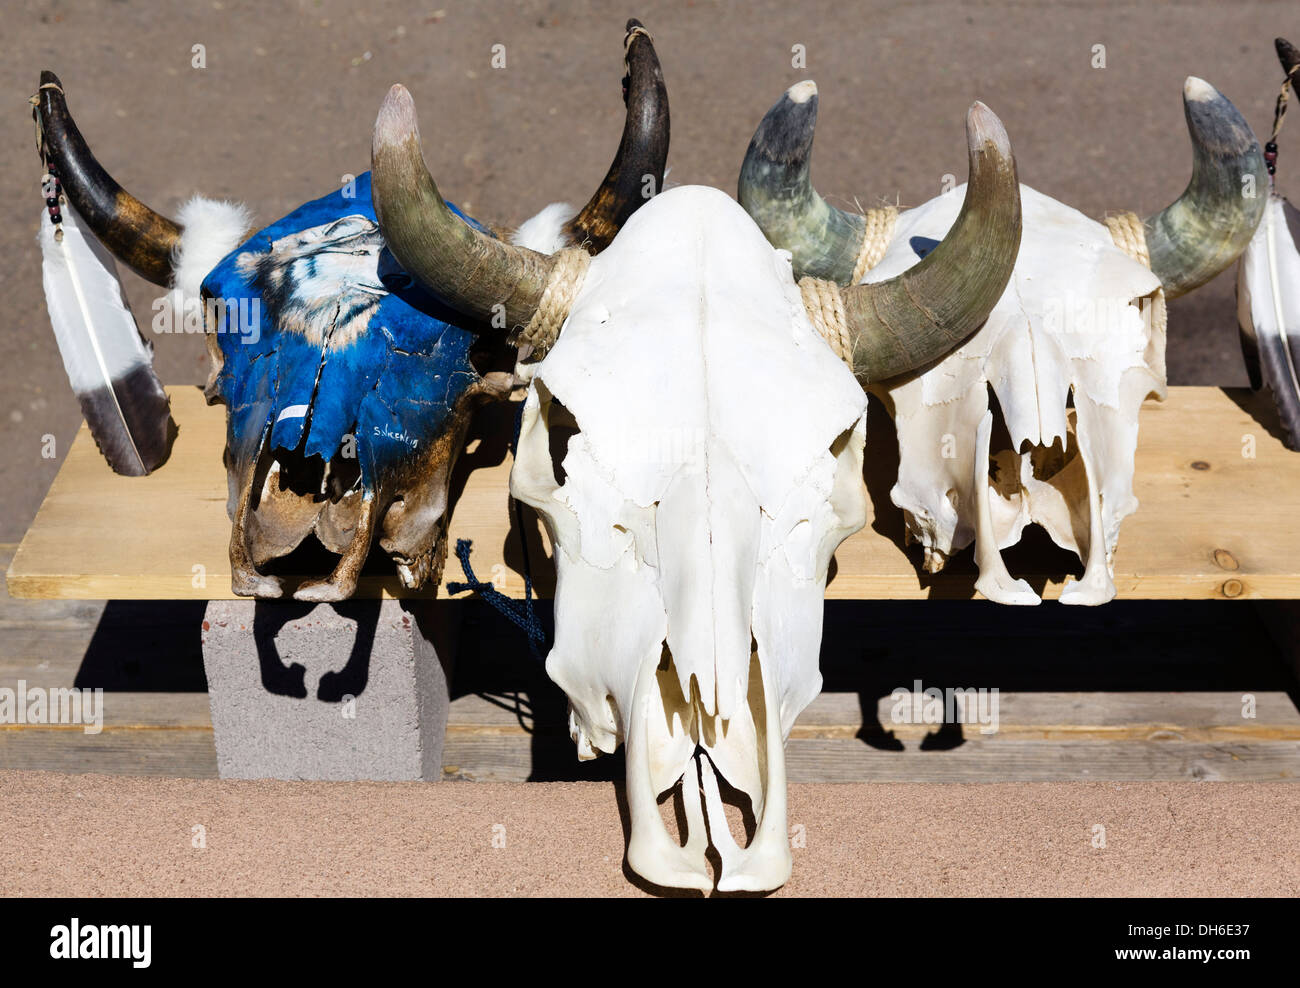 Cattle skulls for sale in a shop on the Old Santa Fe Trail, Santa Fe, New Mexico, USA Stock Photo